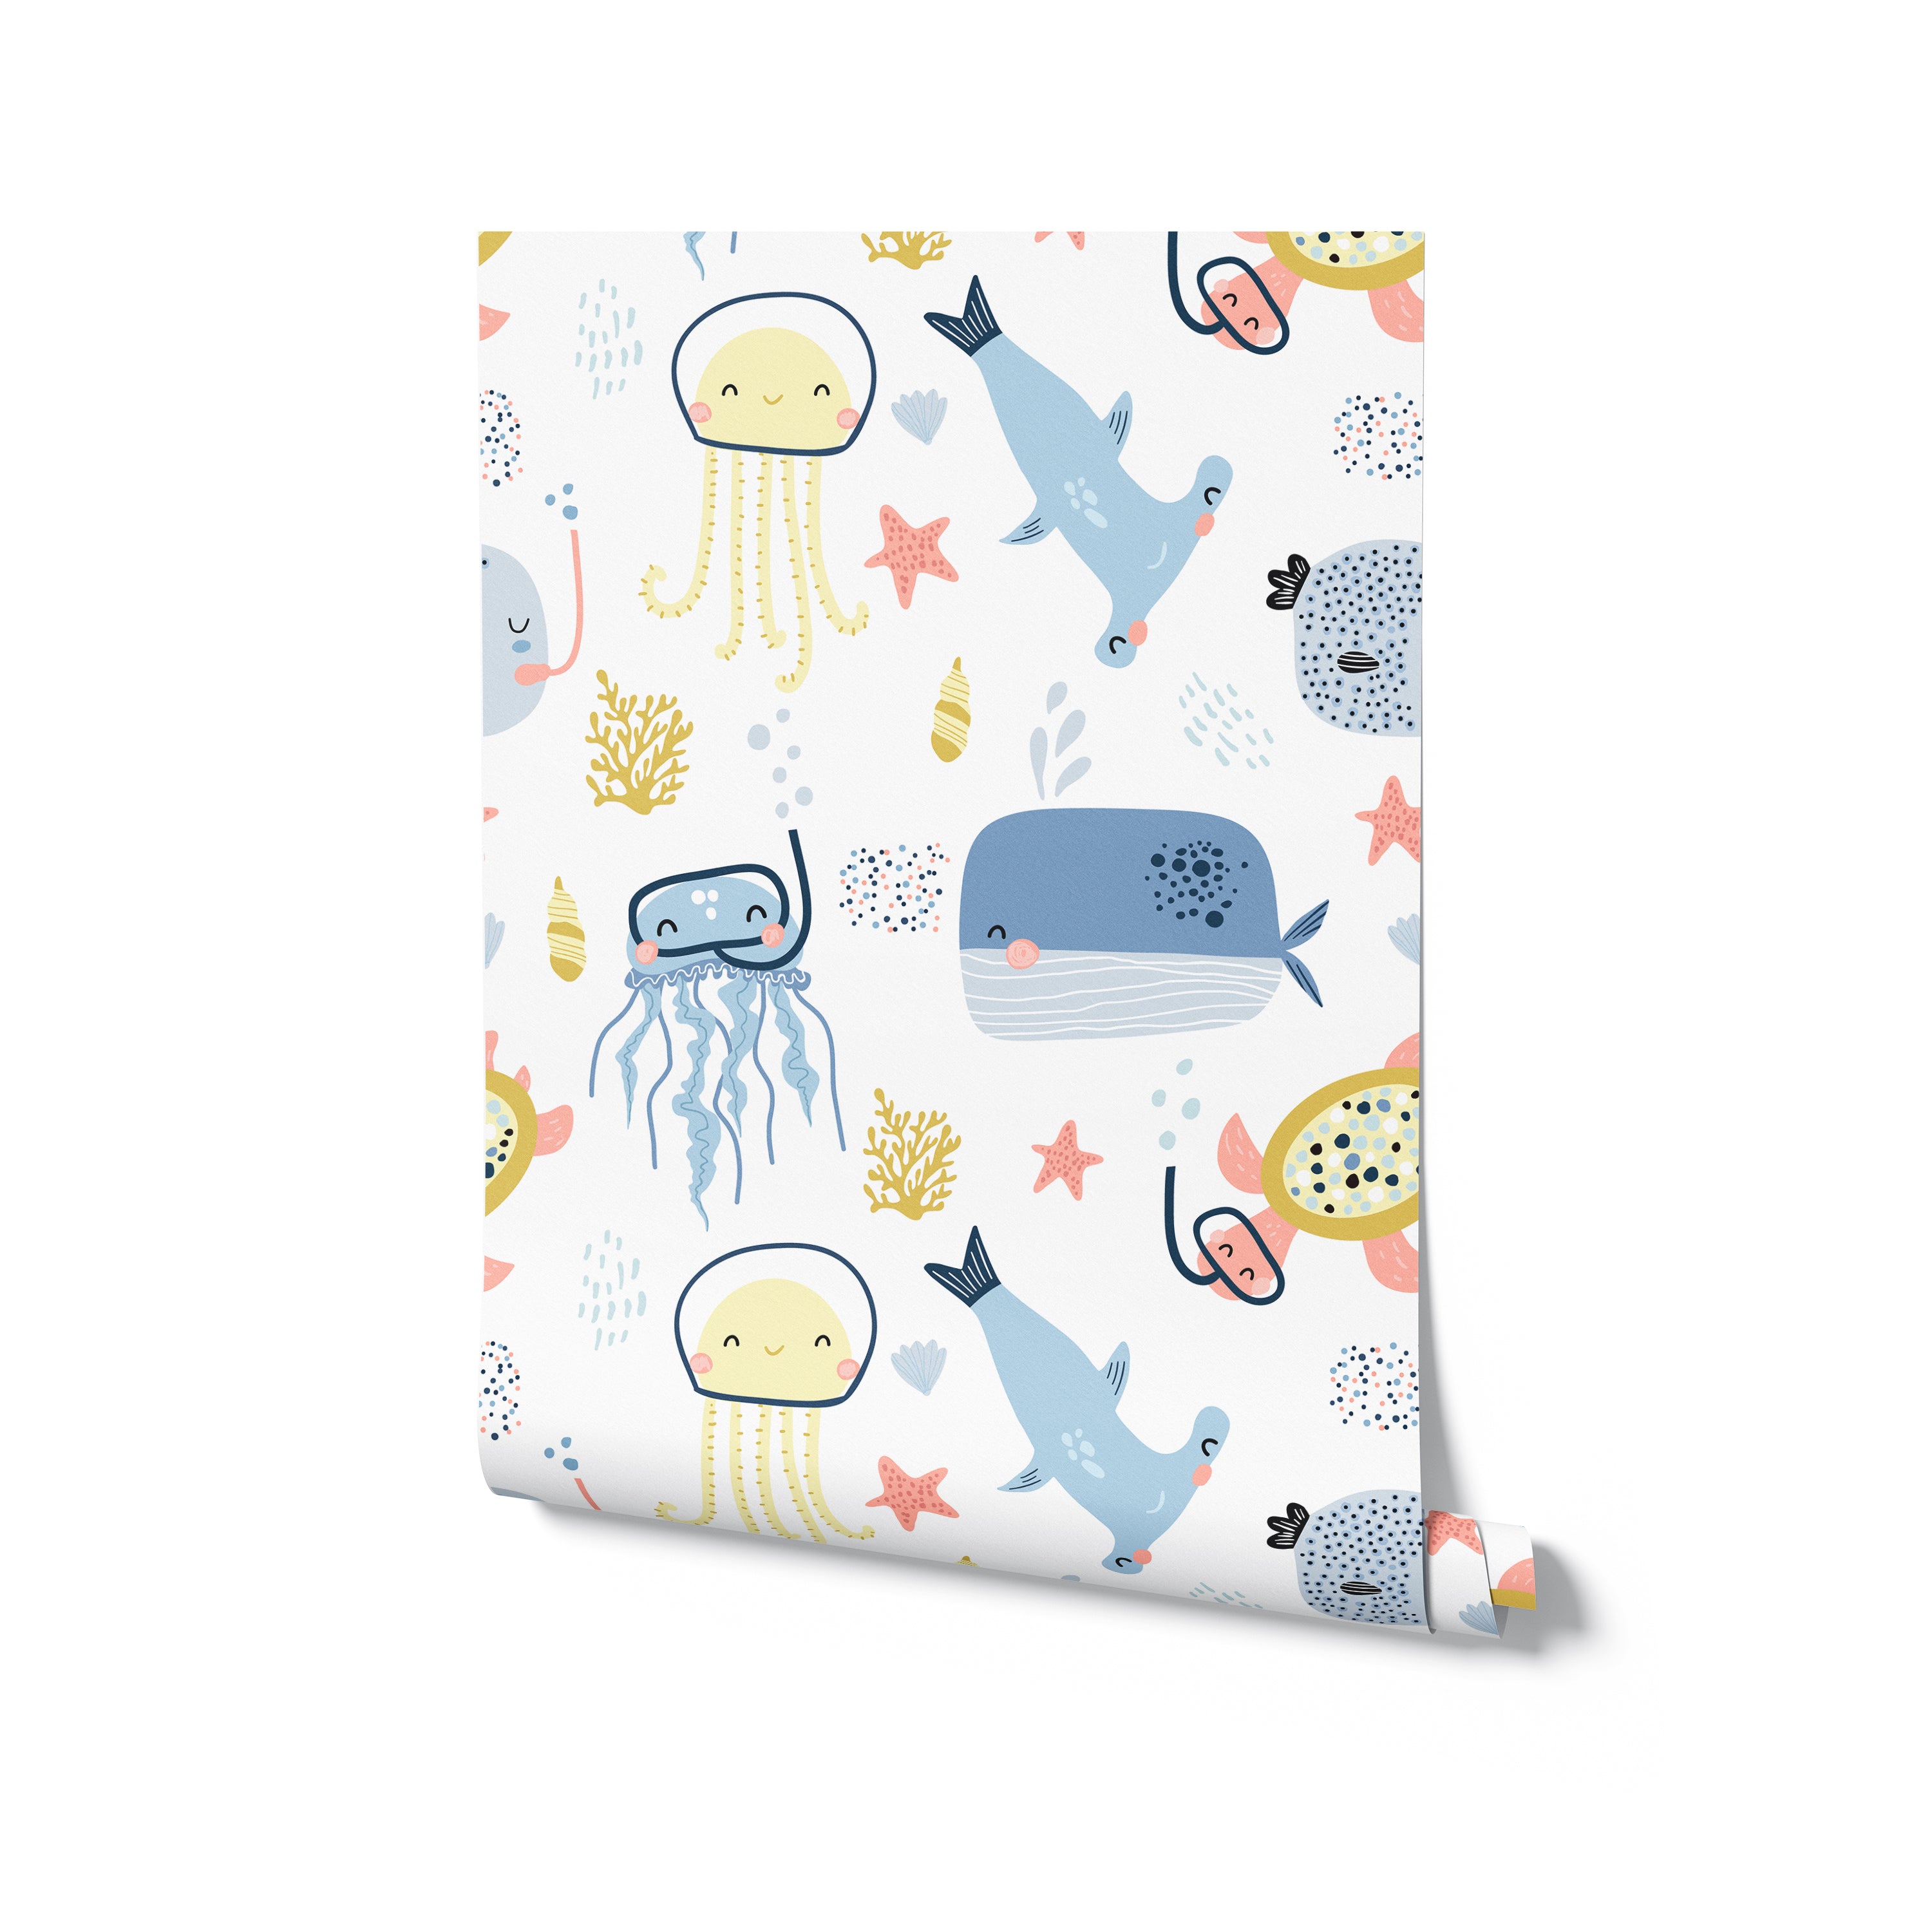 A close-up of the under-the-sea-themed wallpaper, showcasing playful illustrations of various sea creatures, including jellyfish, whales, sea turtles, and coral, set against a light background. The pattern is lively and whimsical, perfect for a child's room.